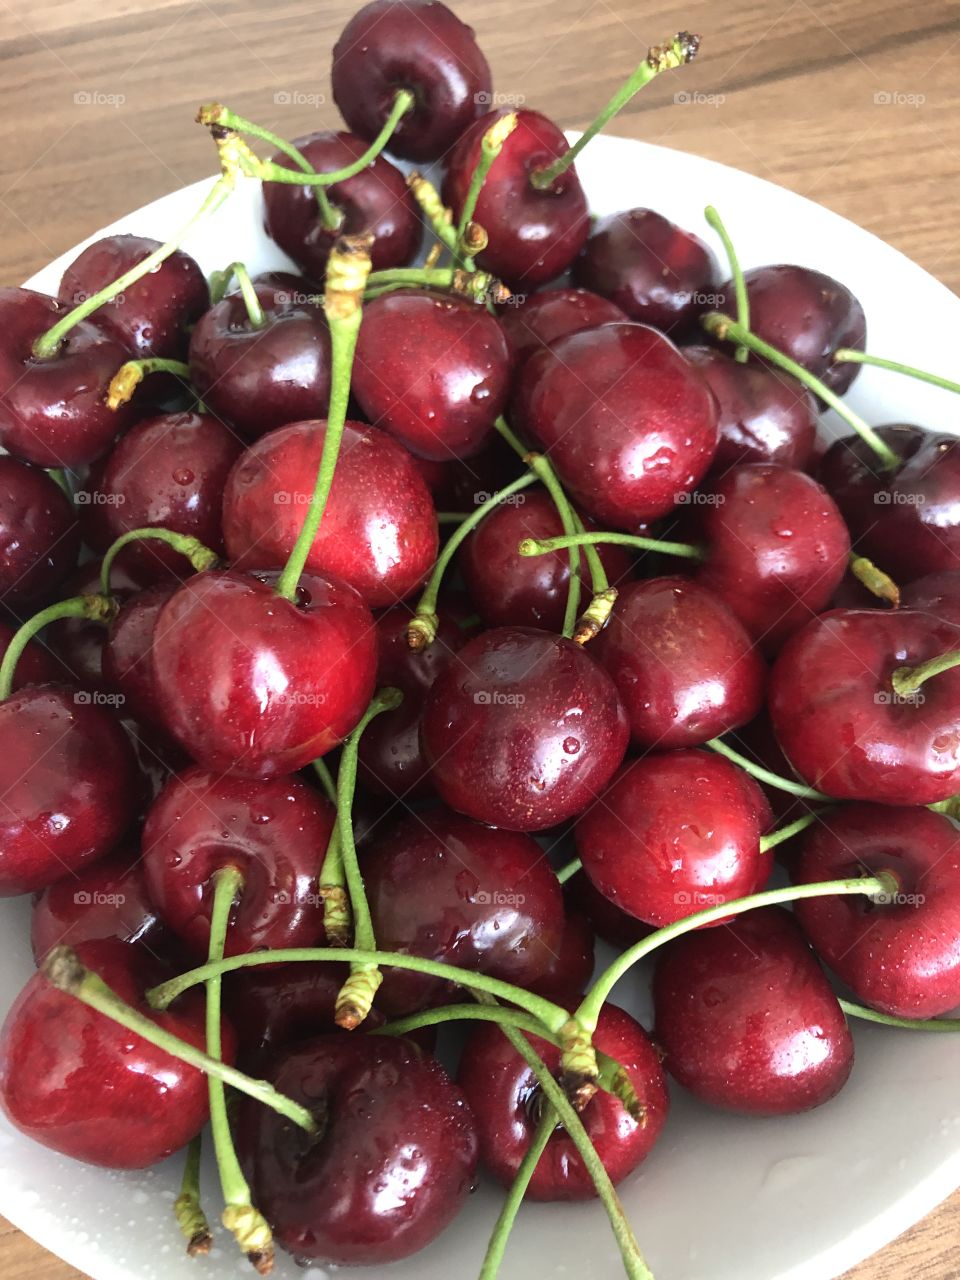 Cherry fruit washed and served for a meal